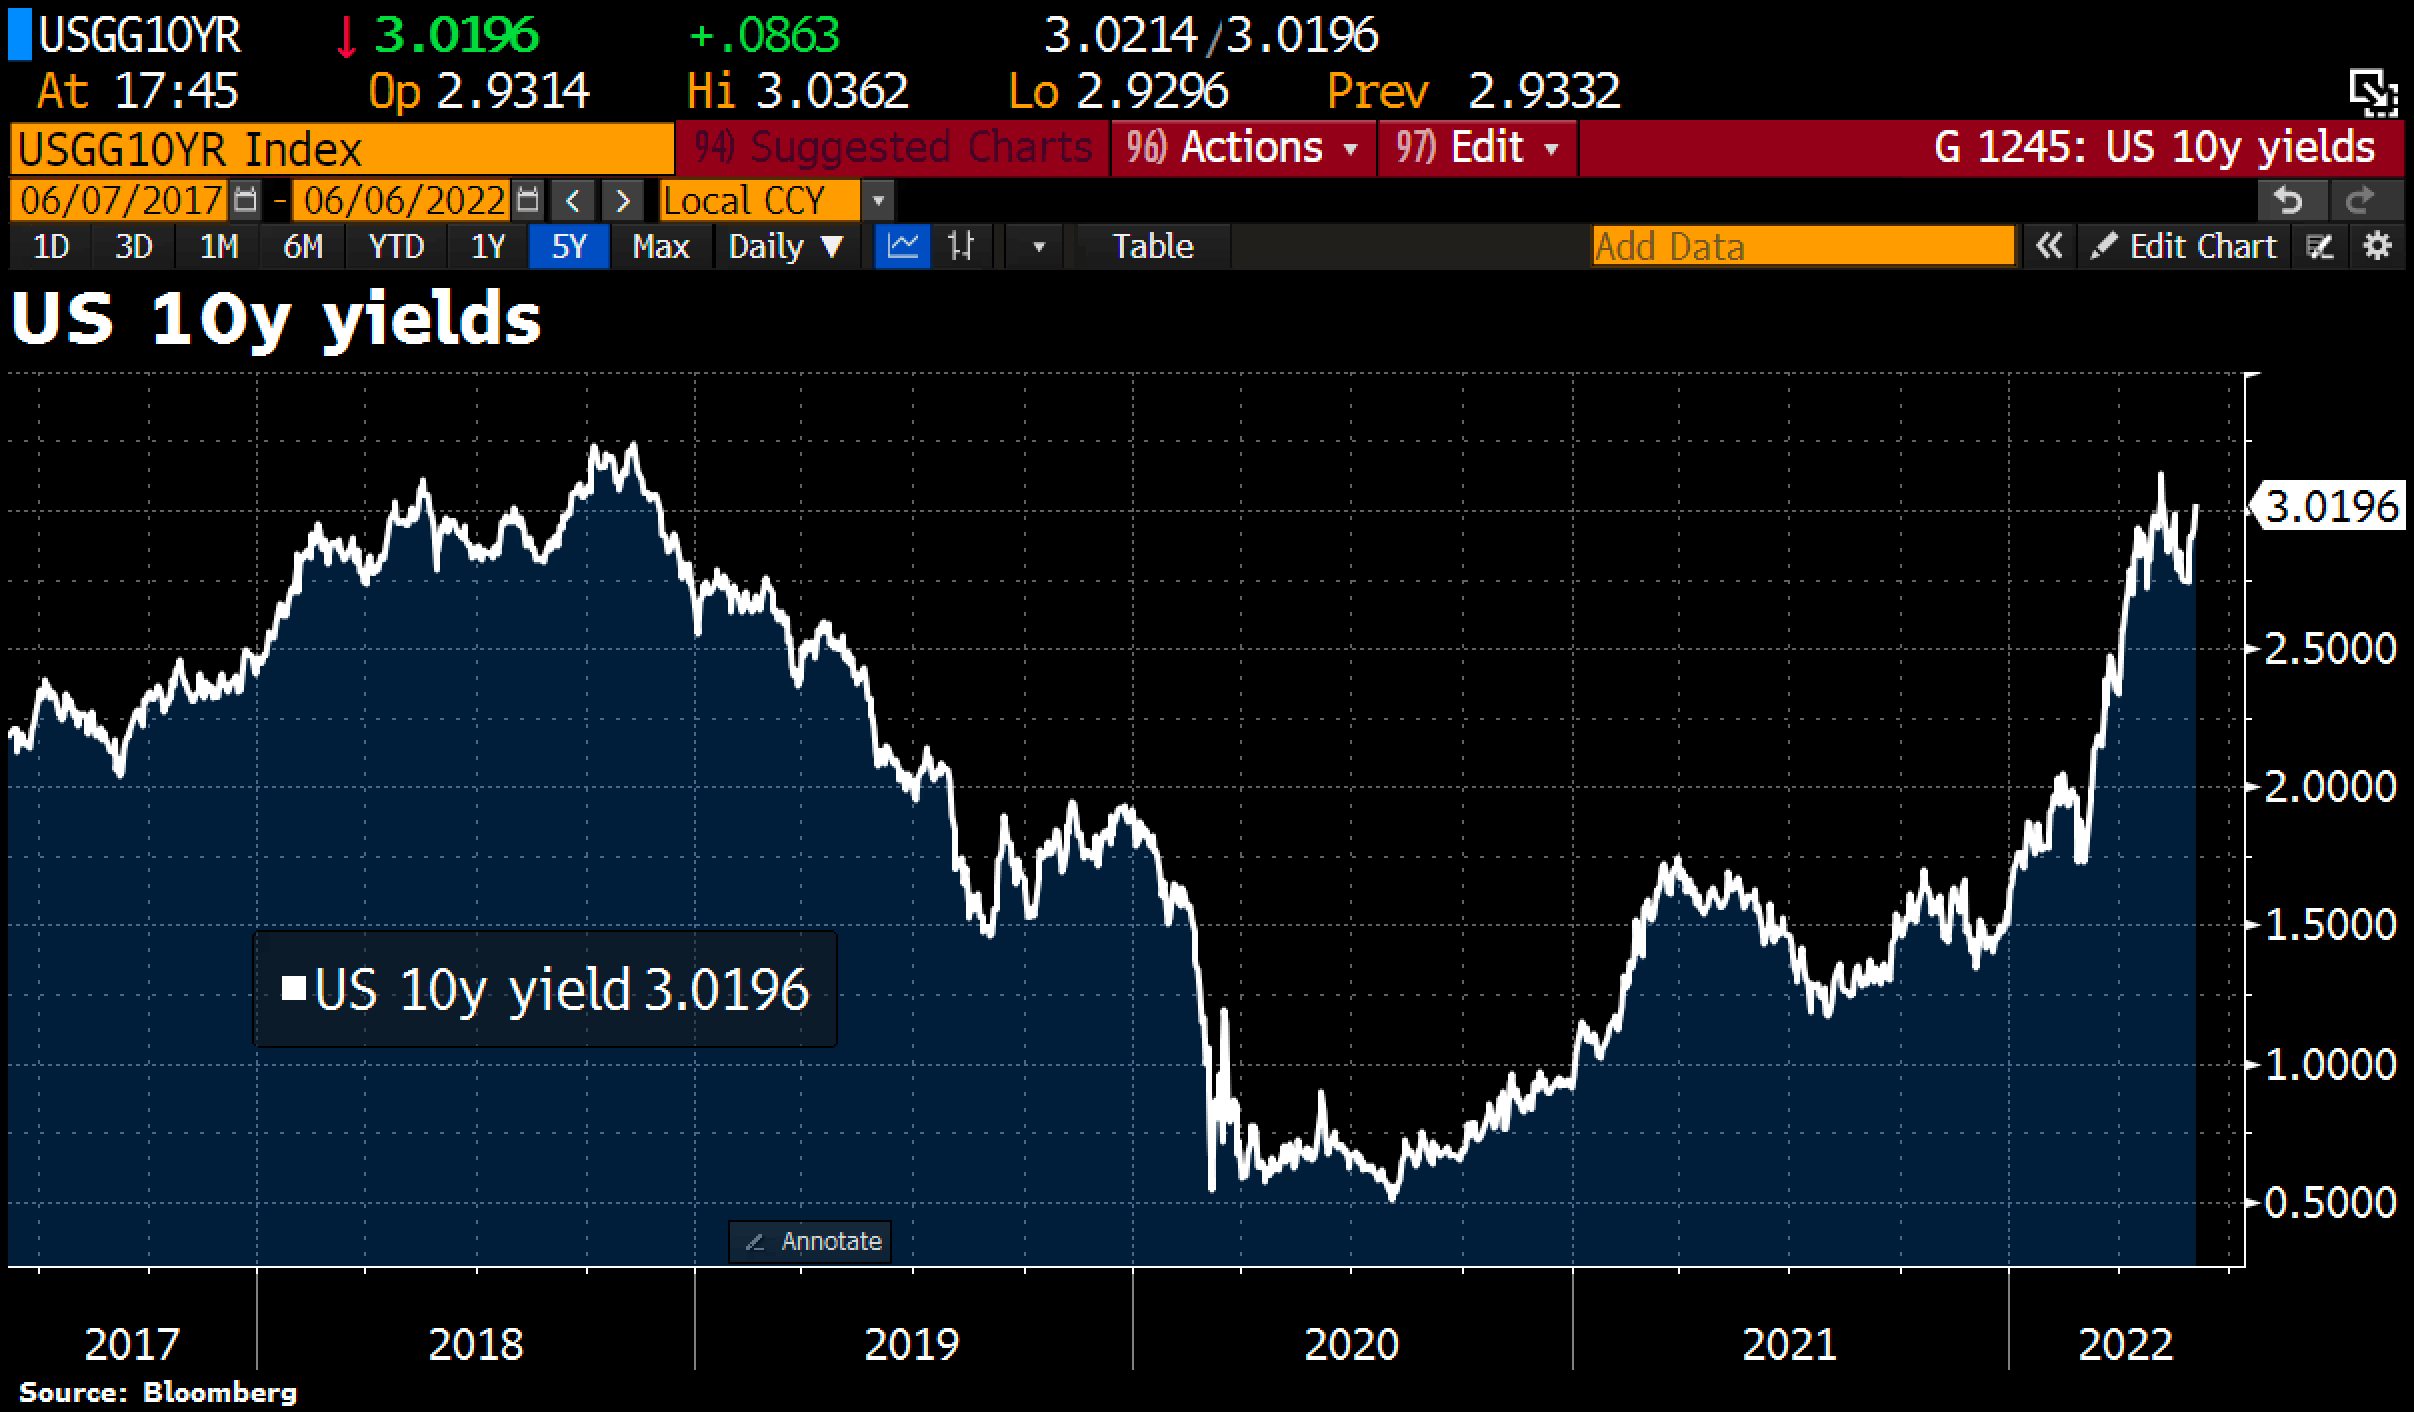 U.S. government bonds 10-year yield as of June 6th, 2022. ©Holger Zschaepitz